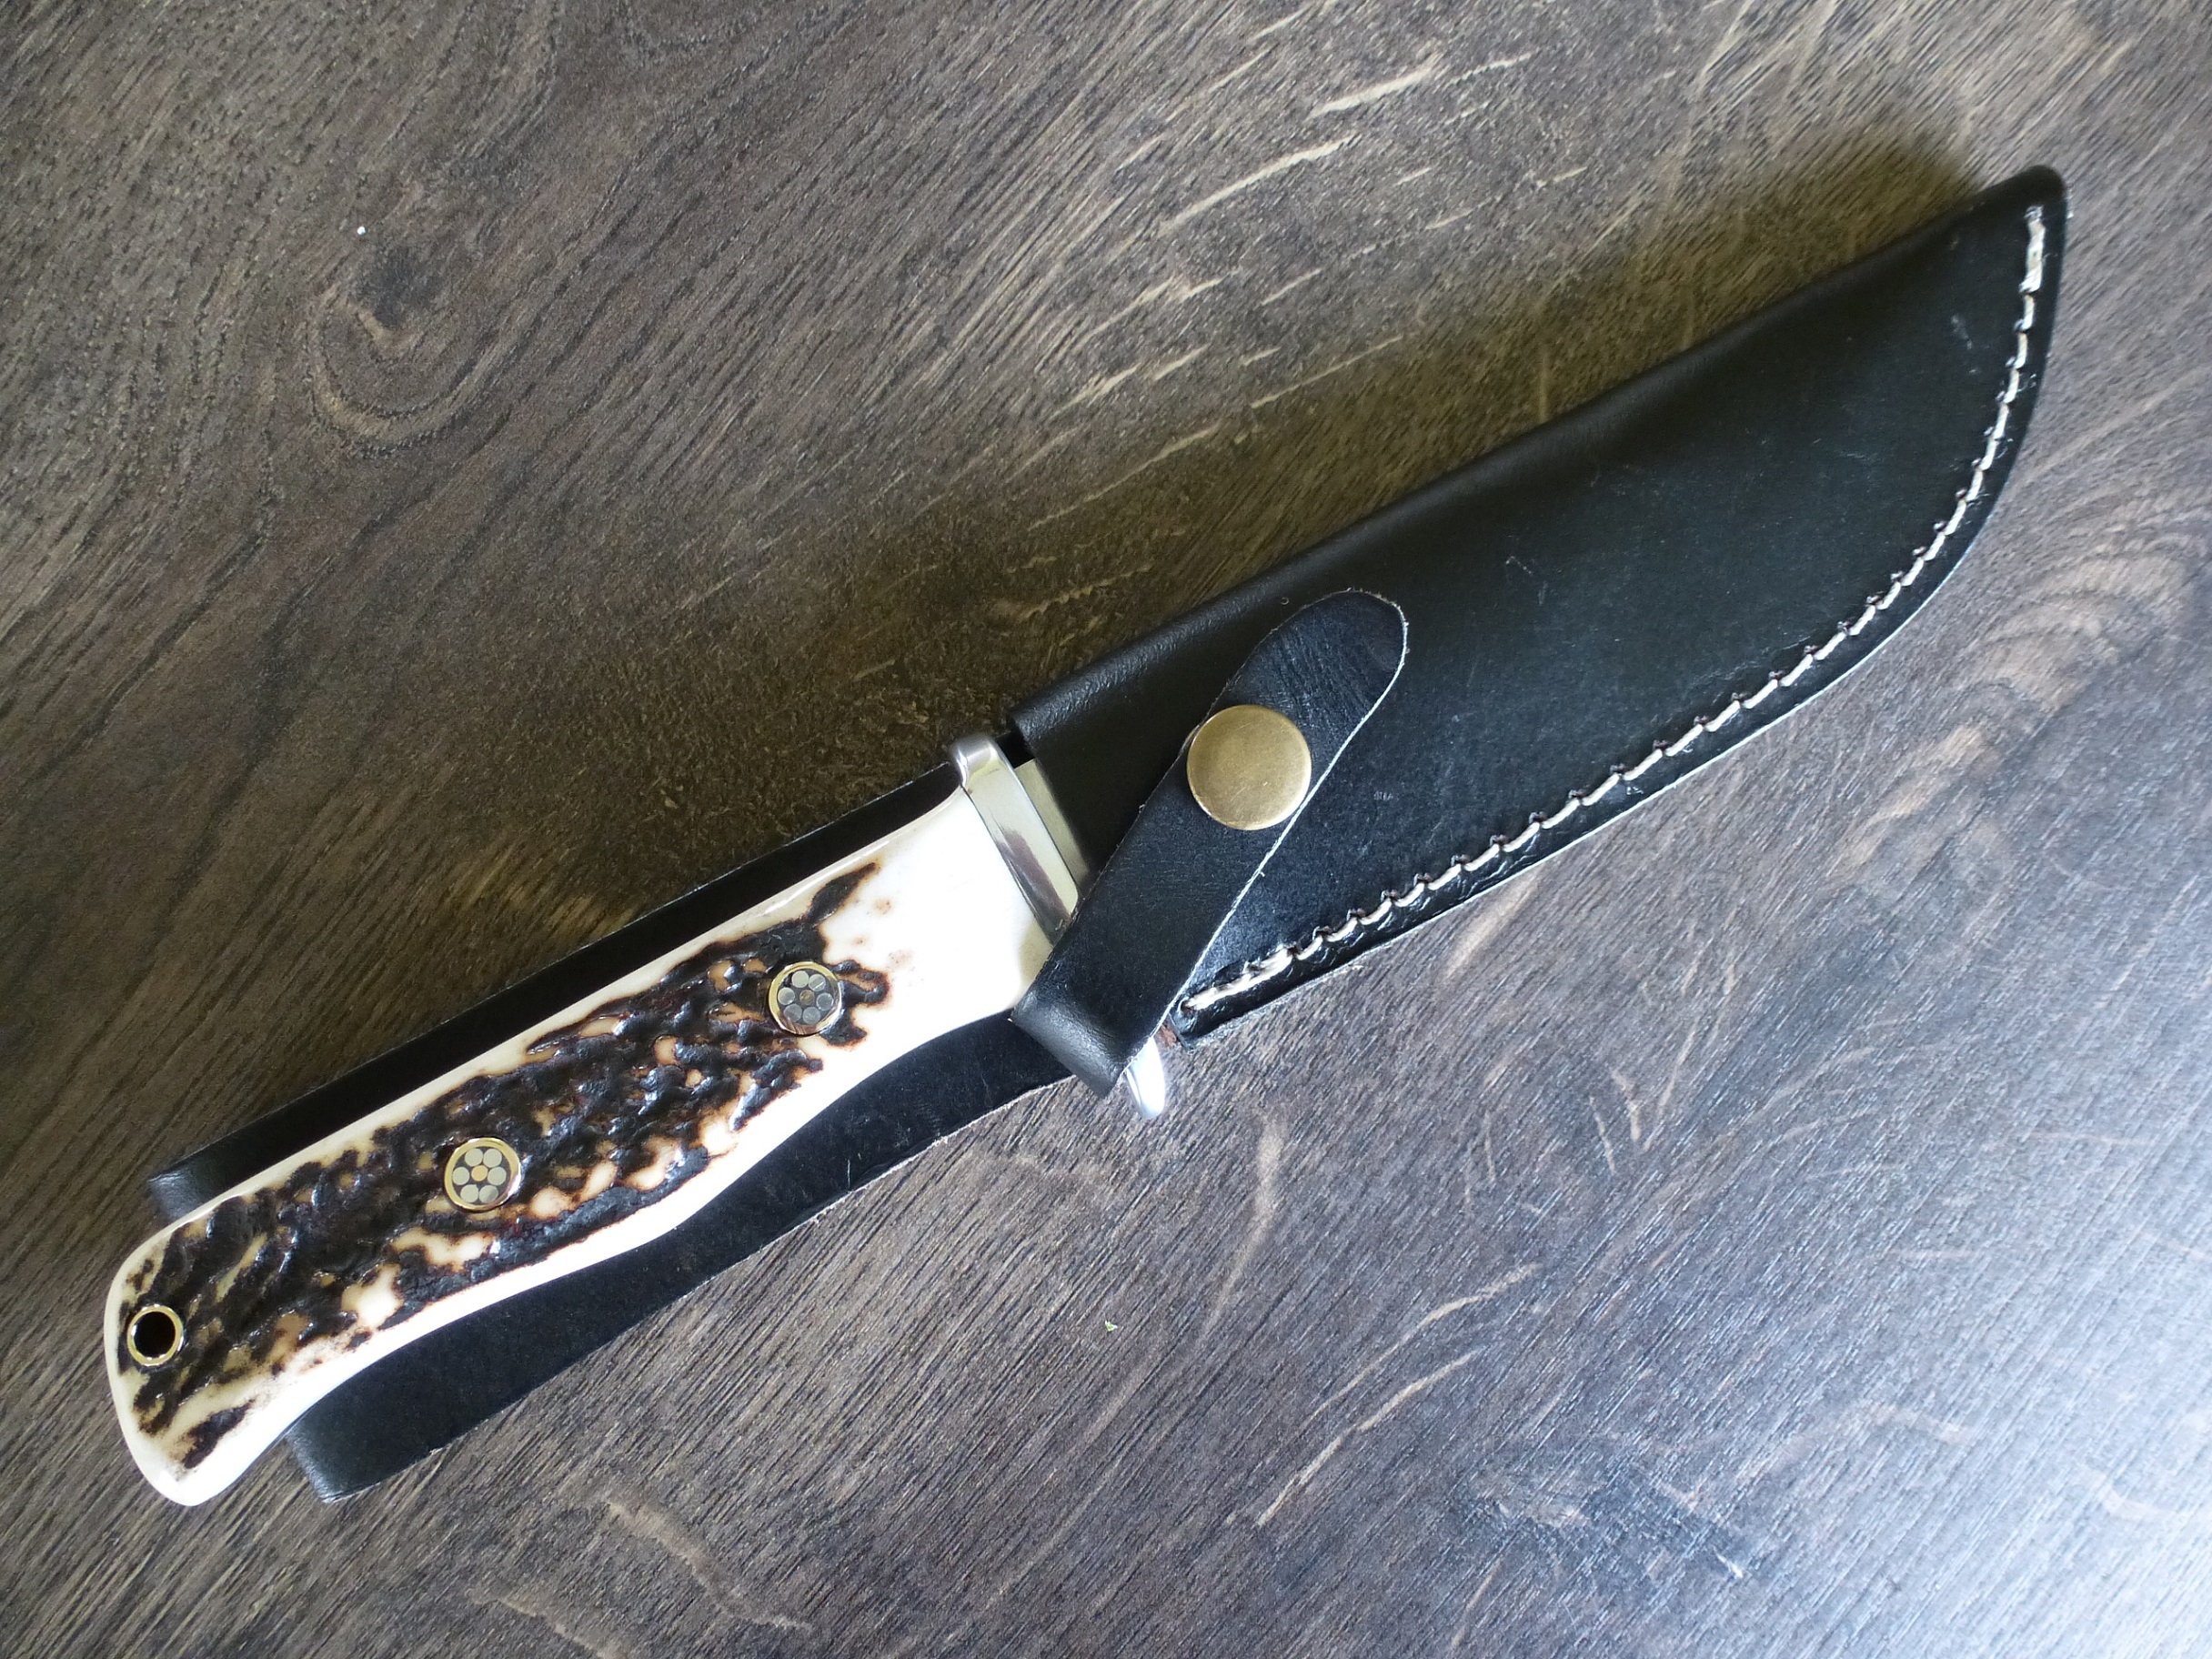 Stag Fixed blade Hunting Knife £47 posted